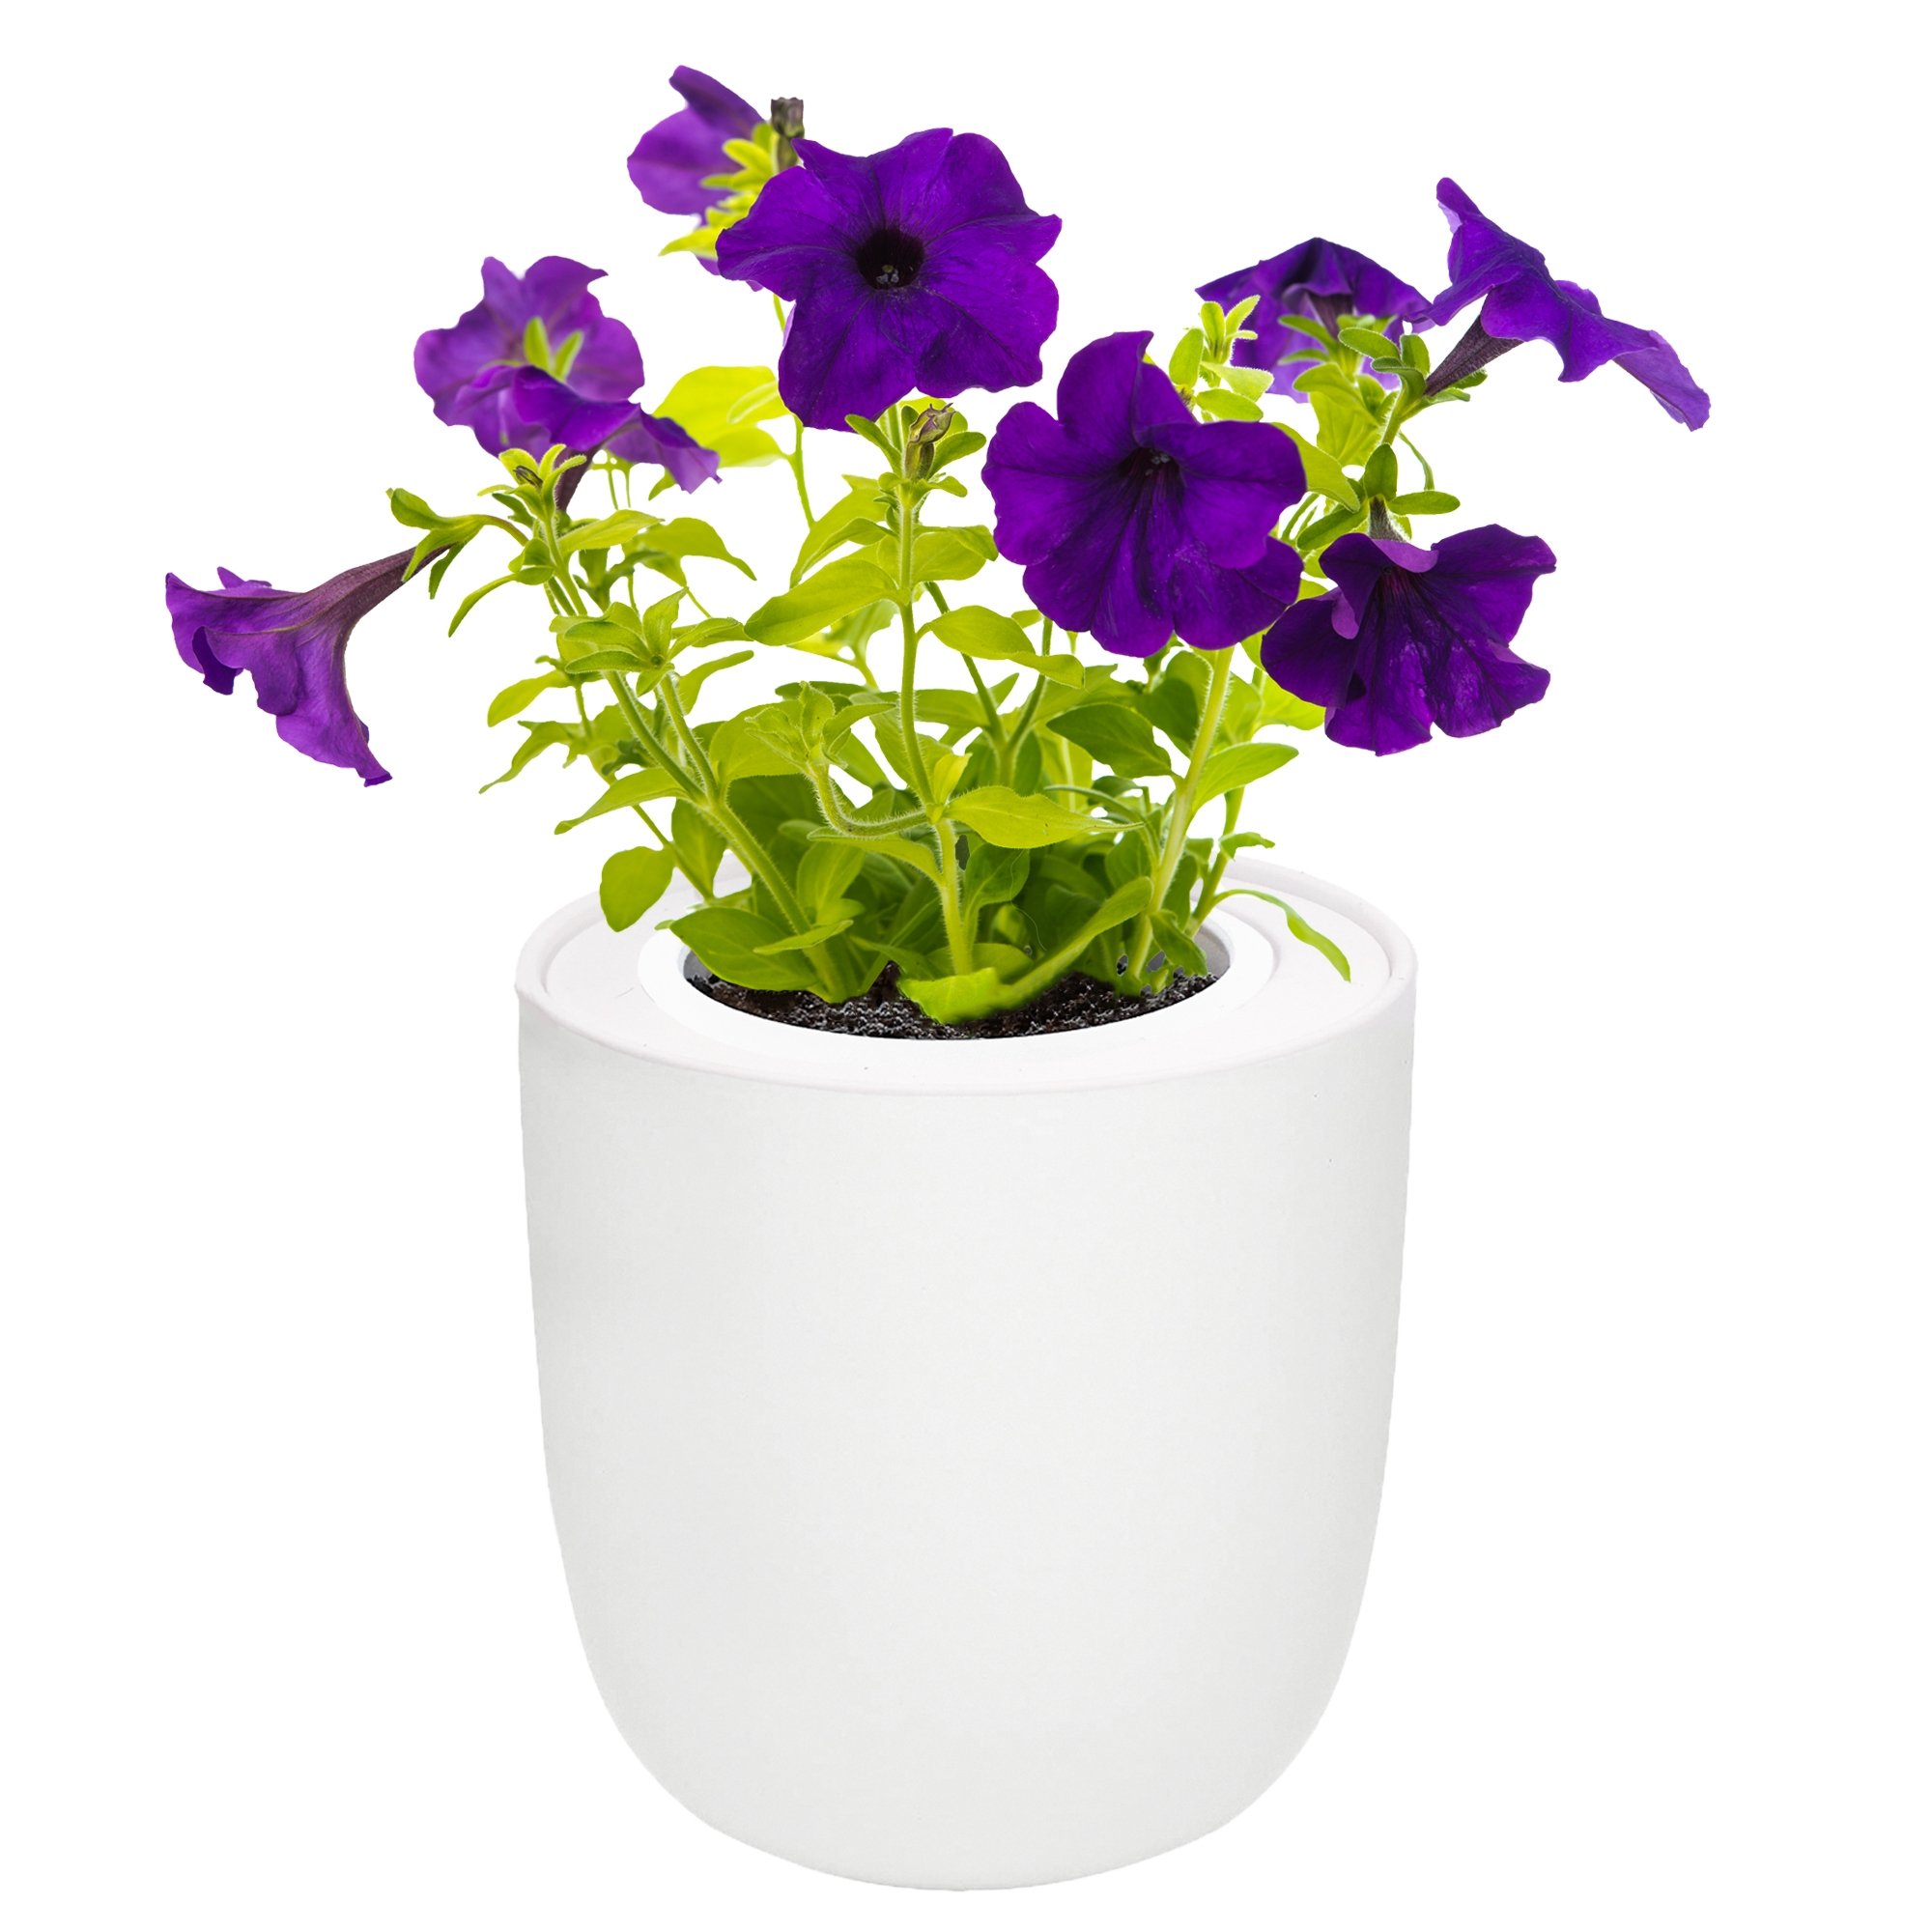 Hydroponic Growing Kit with White Ceramic Pot and Seeds (W-Viola(Johnny Jump Up)